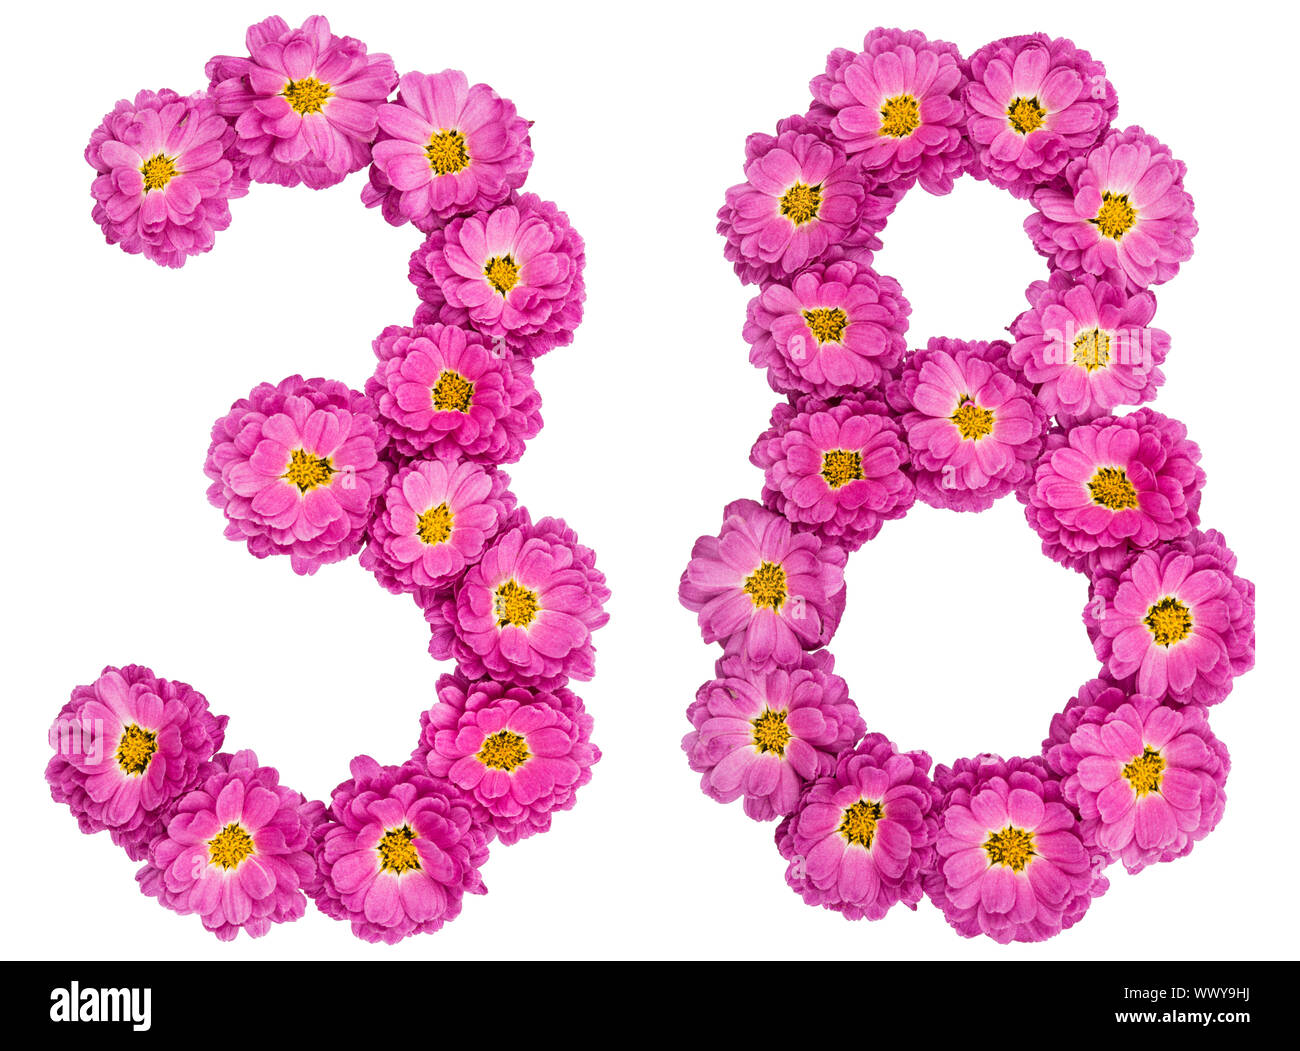 Arabic numeral 38, thirty eight, from flowers of chrysanthemum, isolated on white background Stock Photo